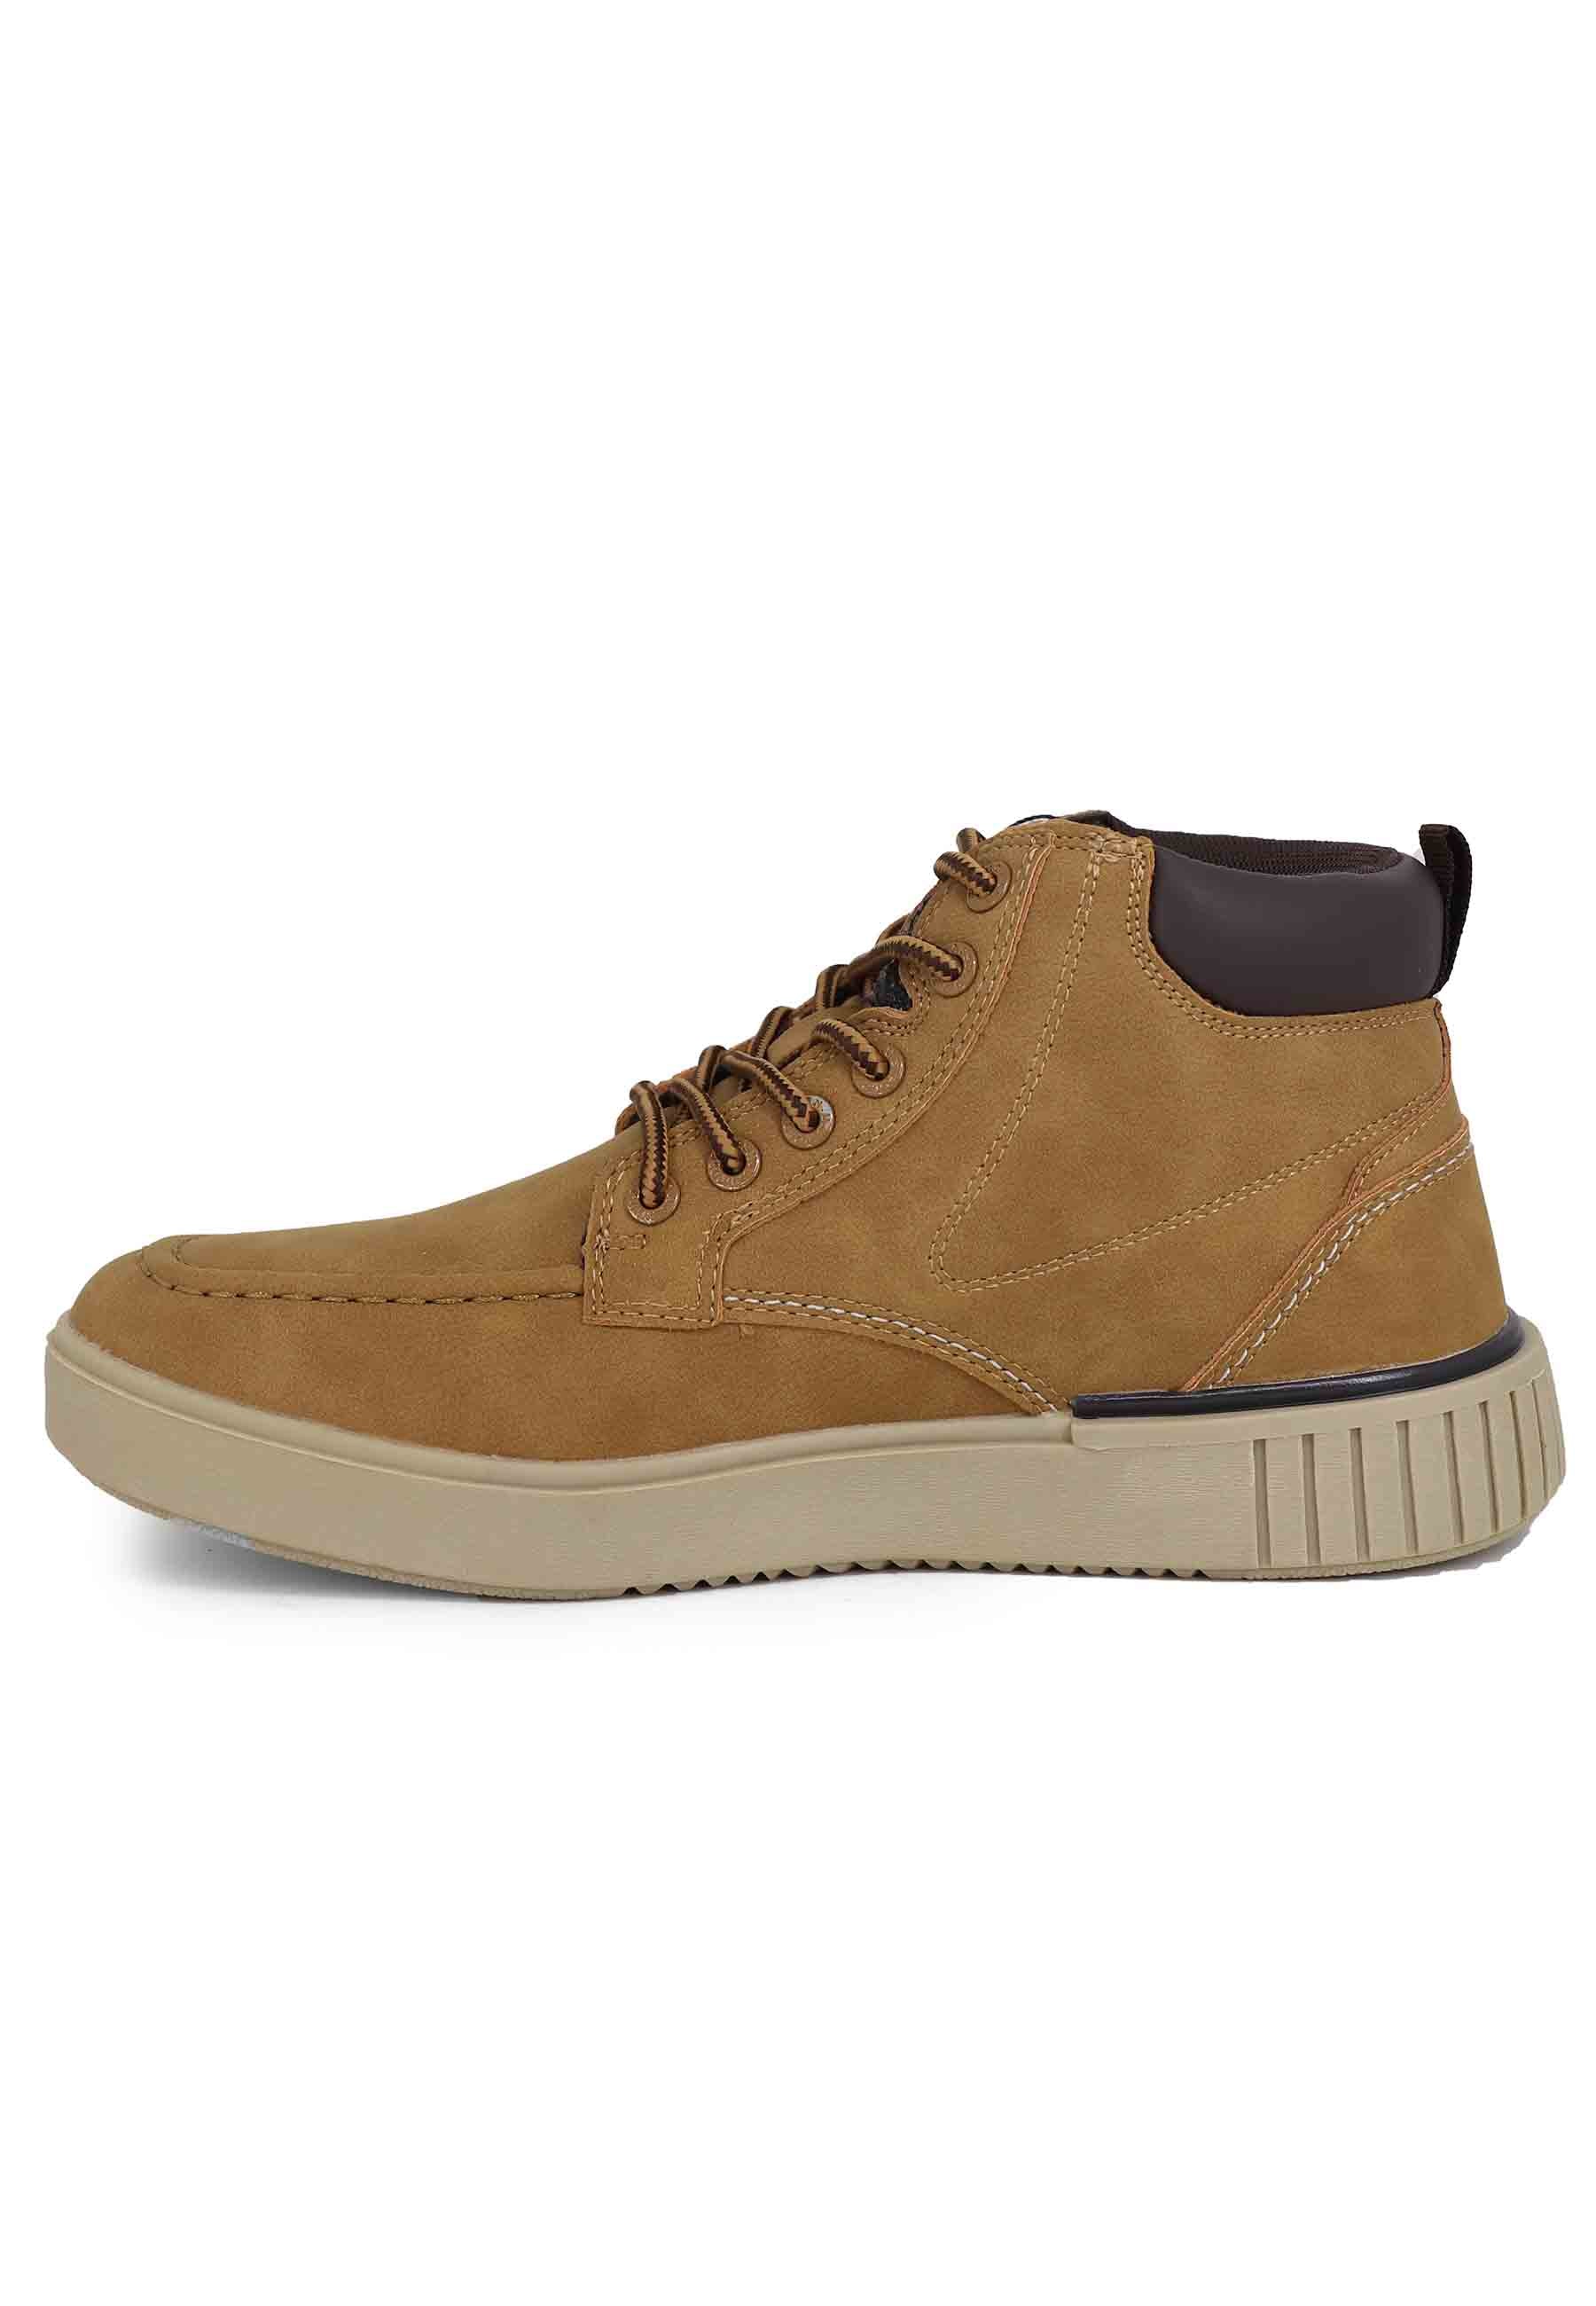 Men's lace-up ankle boots in eco leather